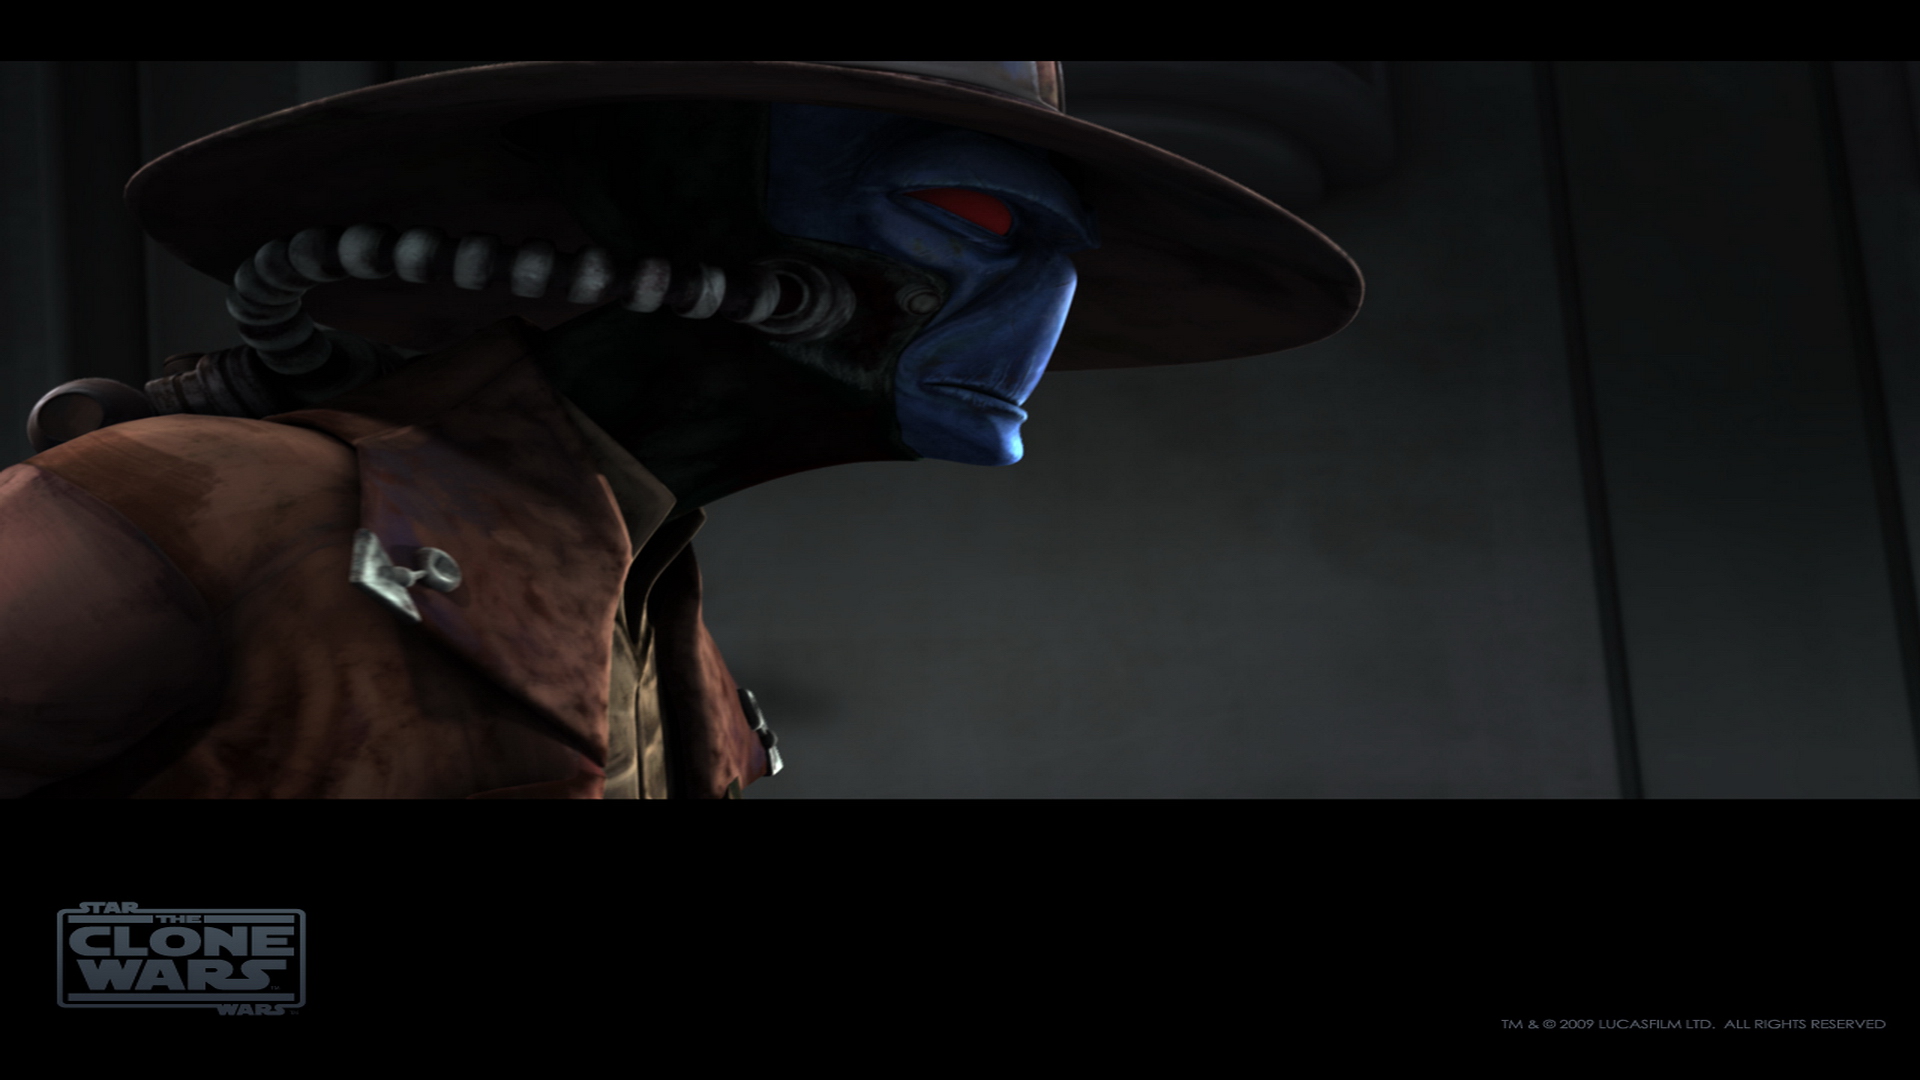 10 Cad Bane HD Wallpapers and Backgrounds